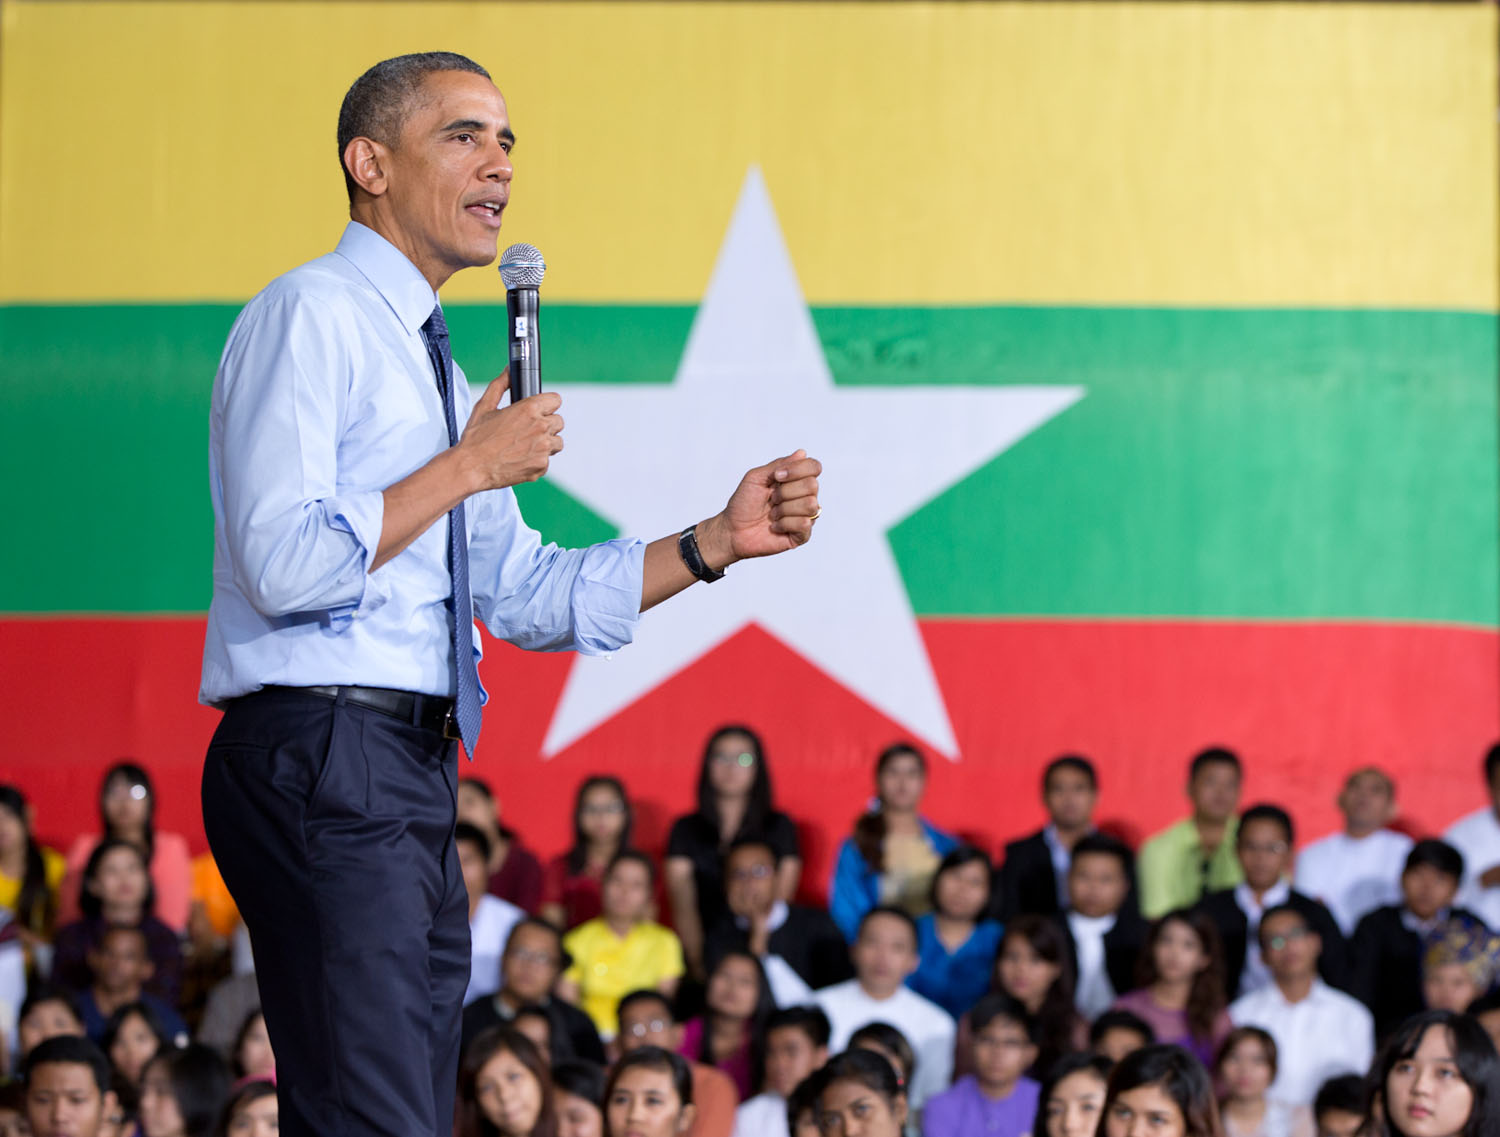 President Obama Answers Questions at YSEALI Town Hall